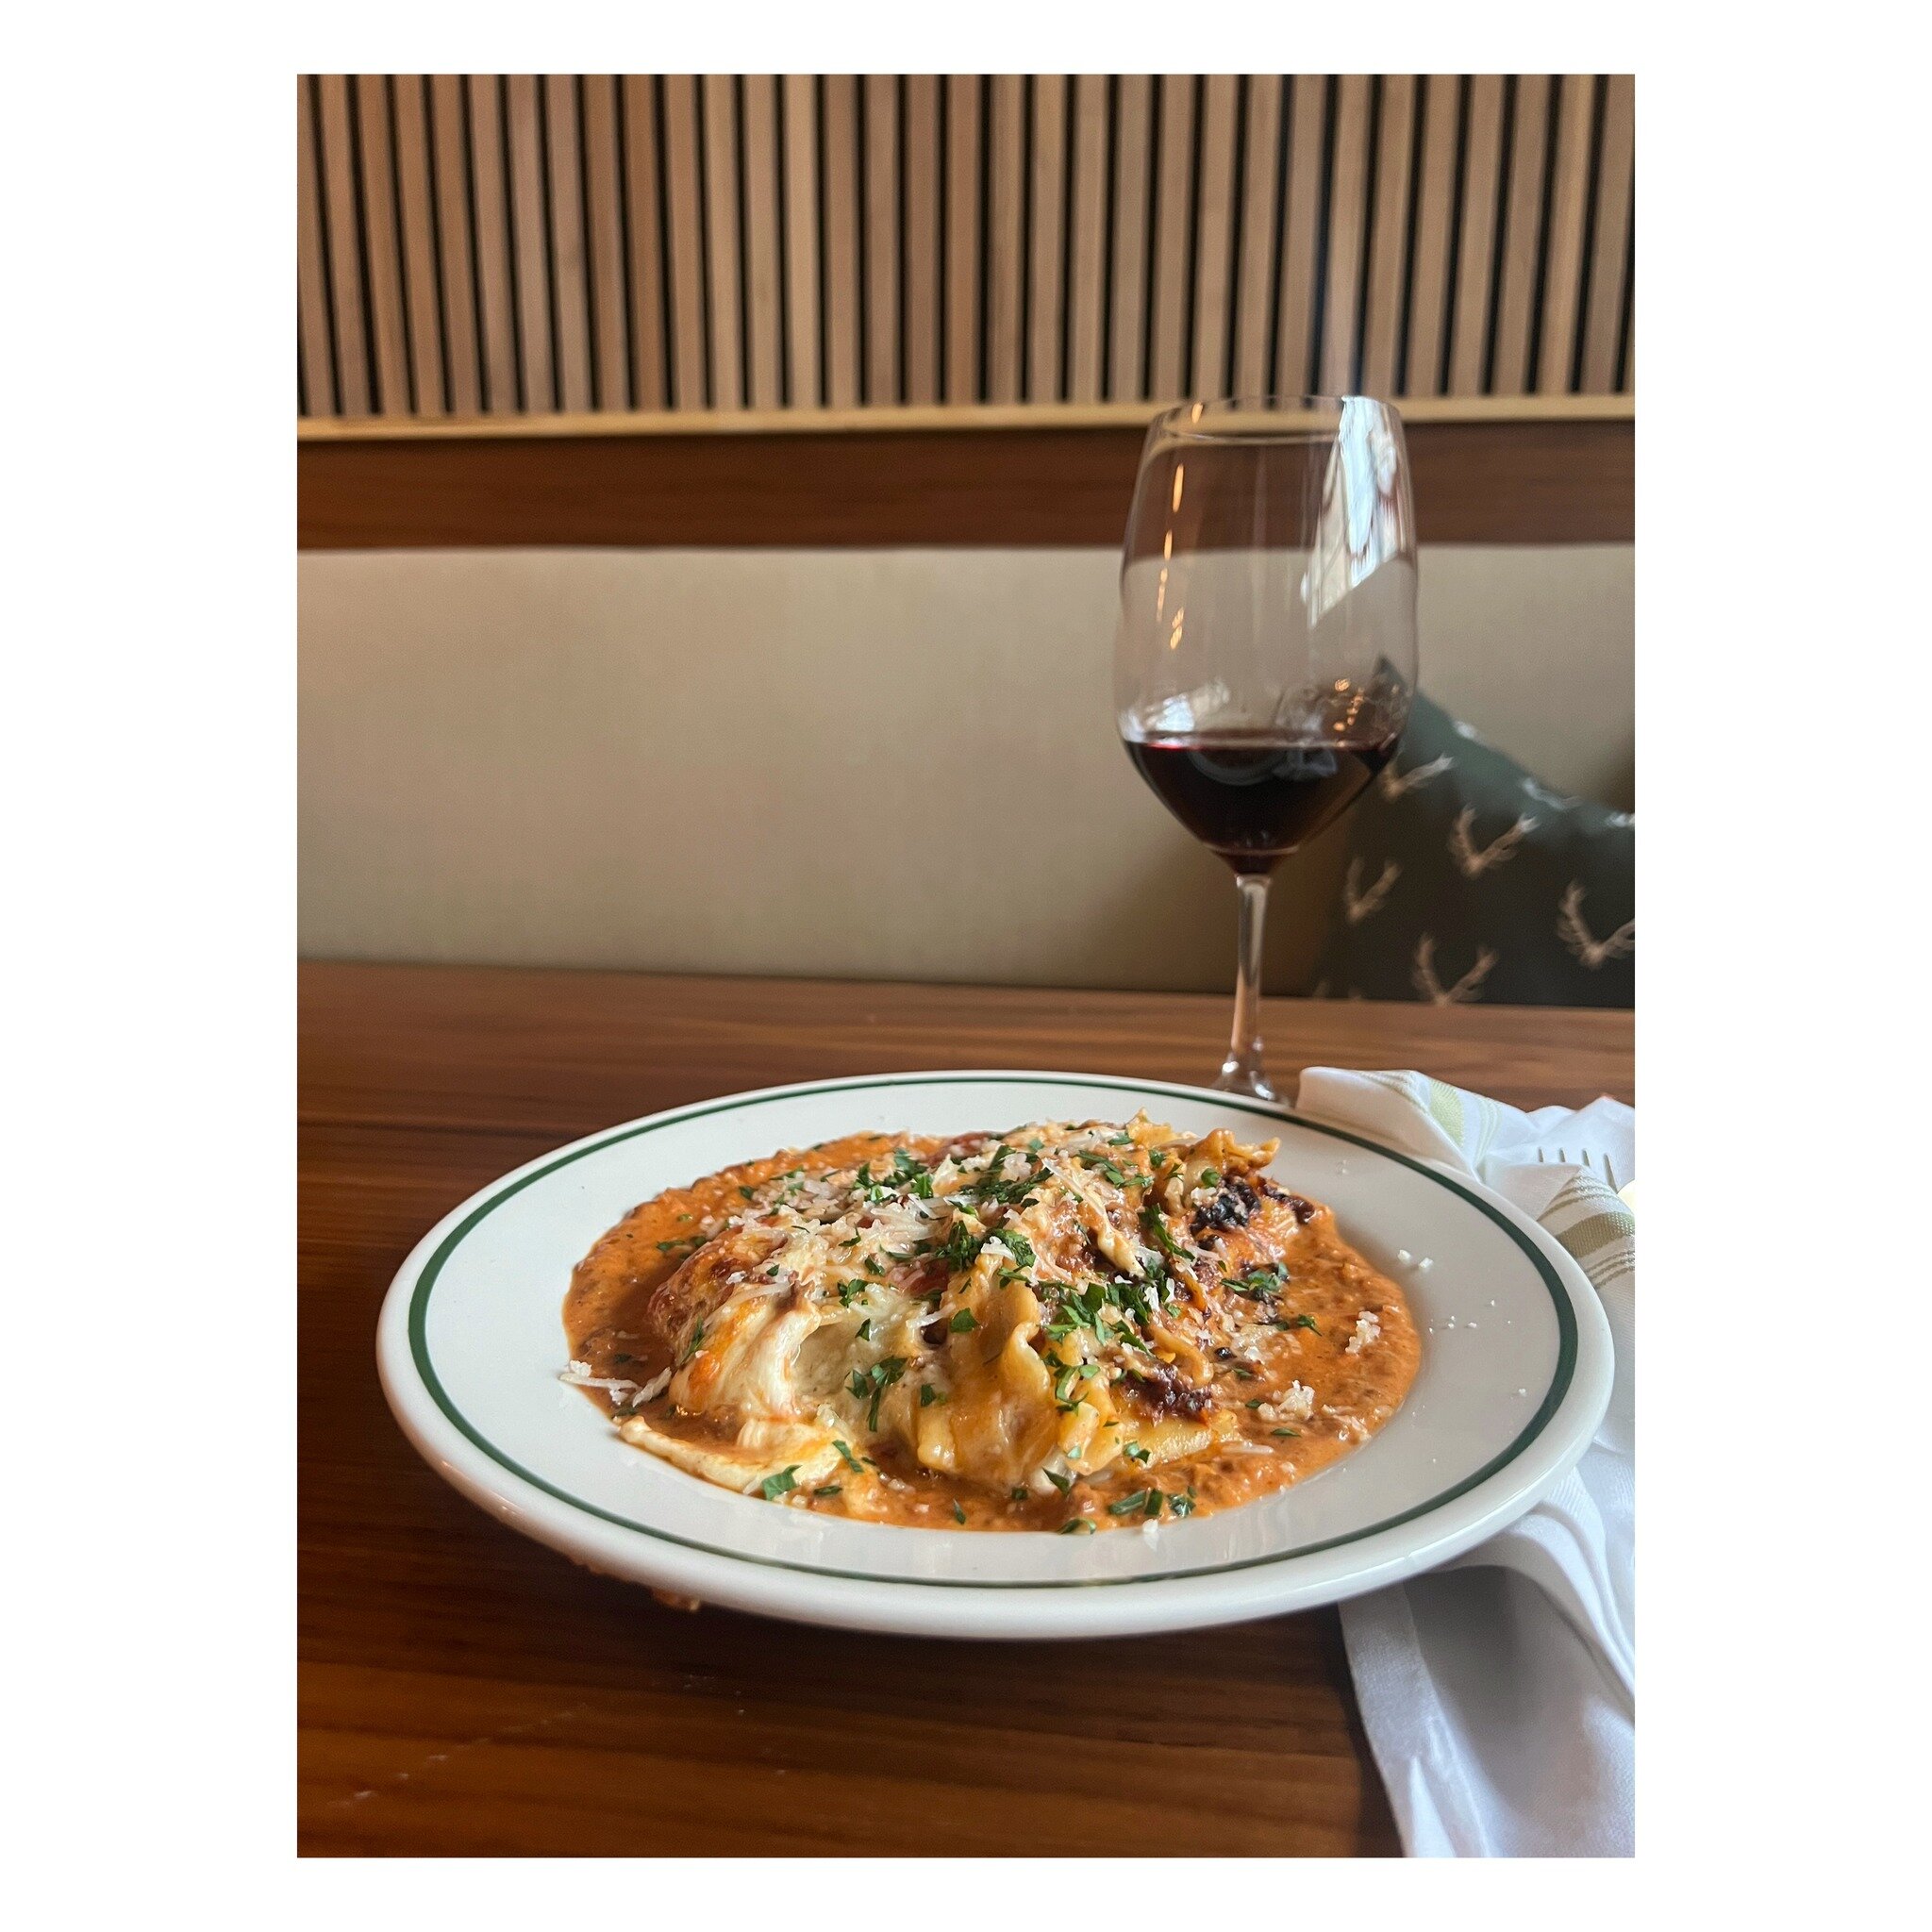 This March we&rsquo;re launching a new midweek special: 𝐖𝐞𝐝𝐧𝐞𝐬𝐝𝐚𝐲 𝐖𝐢𝐧𝐞 + 𝐏𝐚𝐬𝐭𝐚 for $30. In fact, the pasta dish is so special, it will be offered on Wednesday nights only! This winning Wednesday combination makes its debut next week